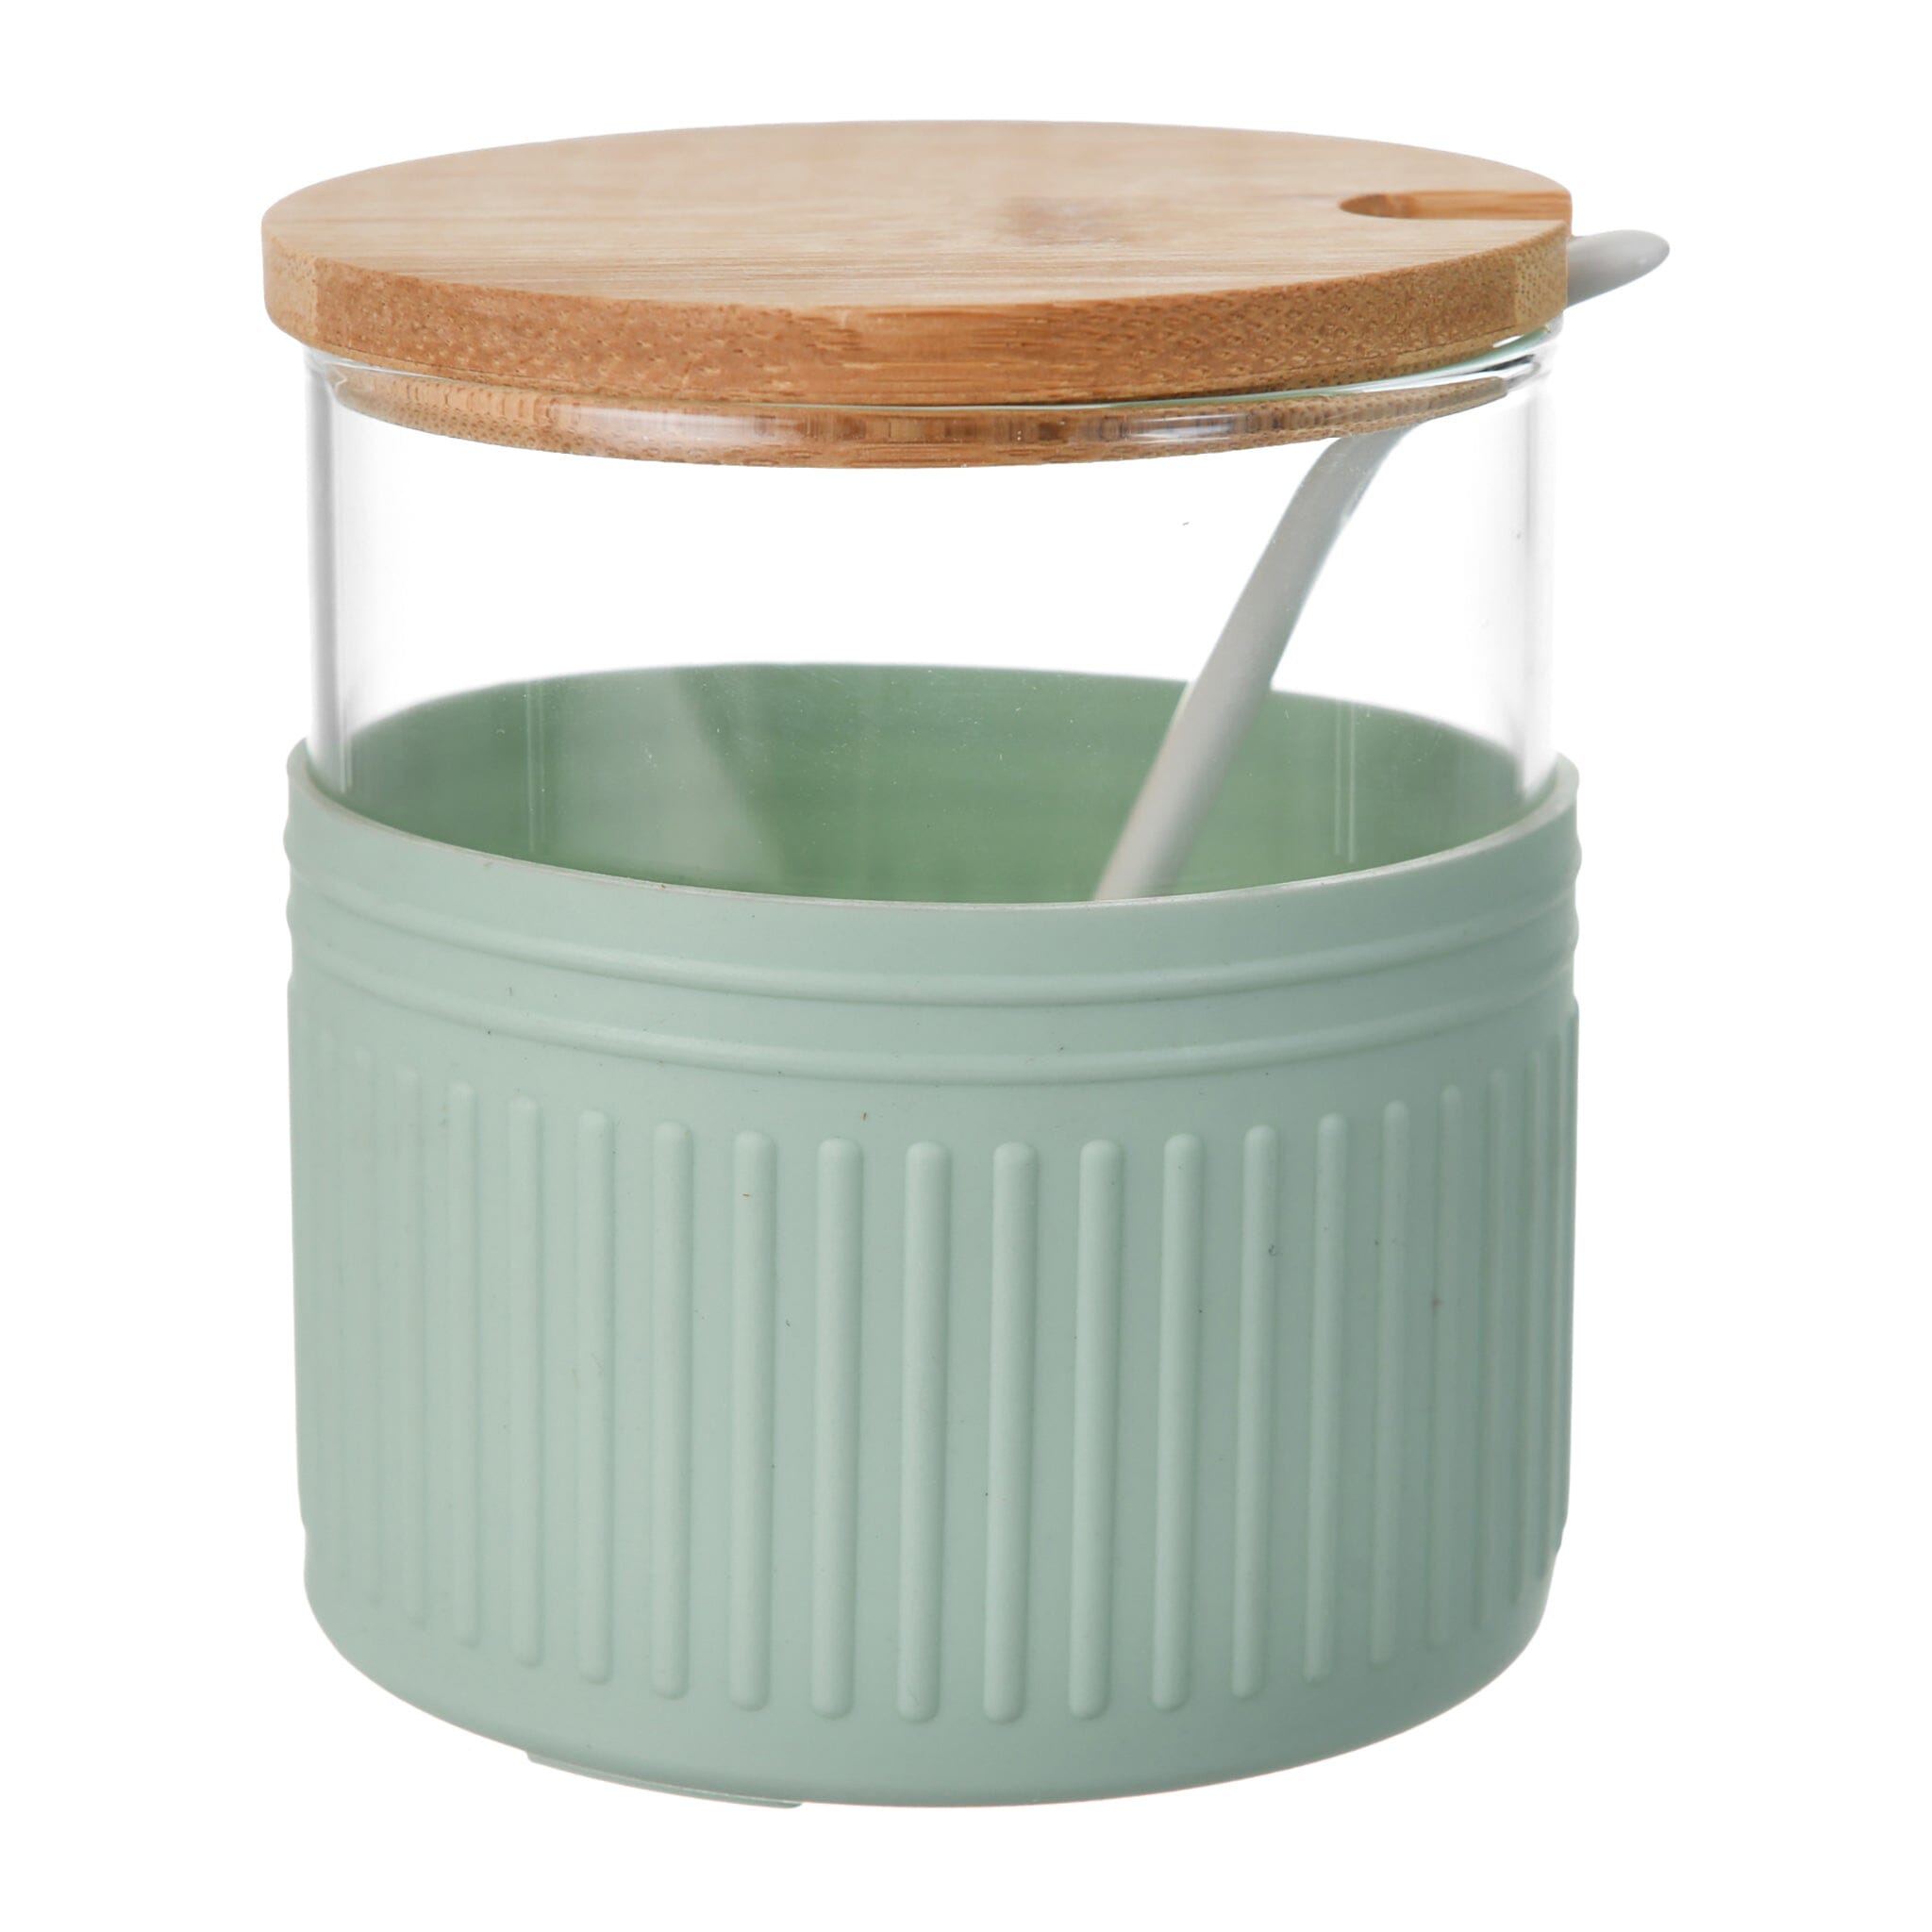 O'lala - Spices Jar with Wooden Cover, Spoon & Silicone Cover - Green - 8x10cm - 520008179